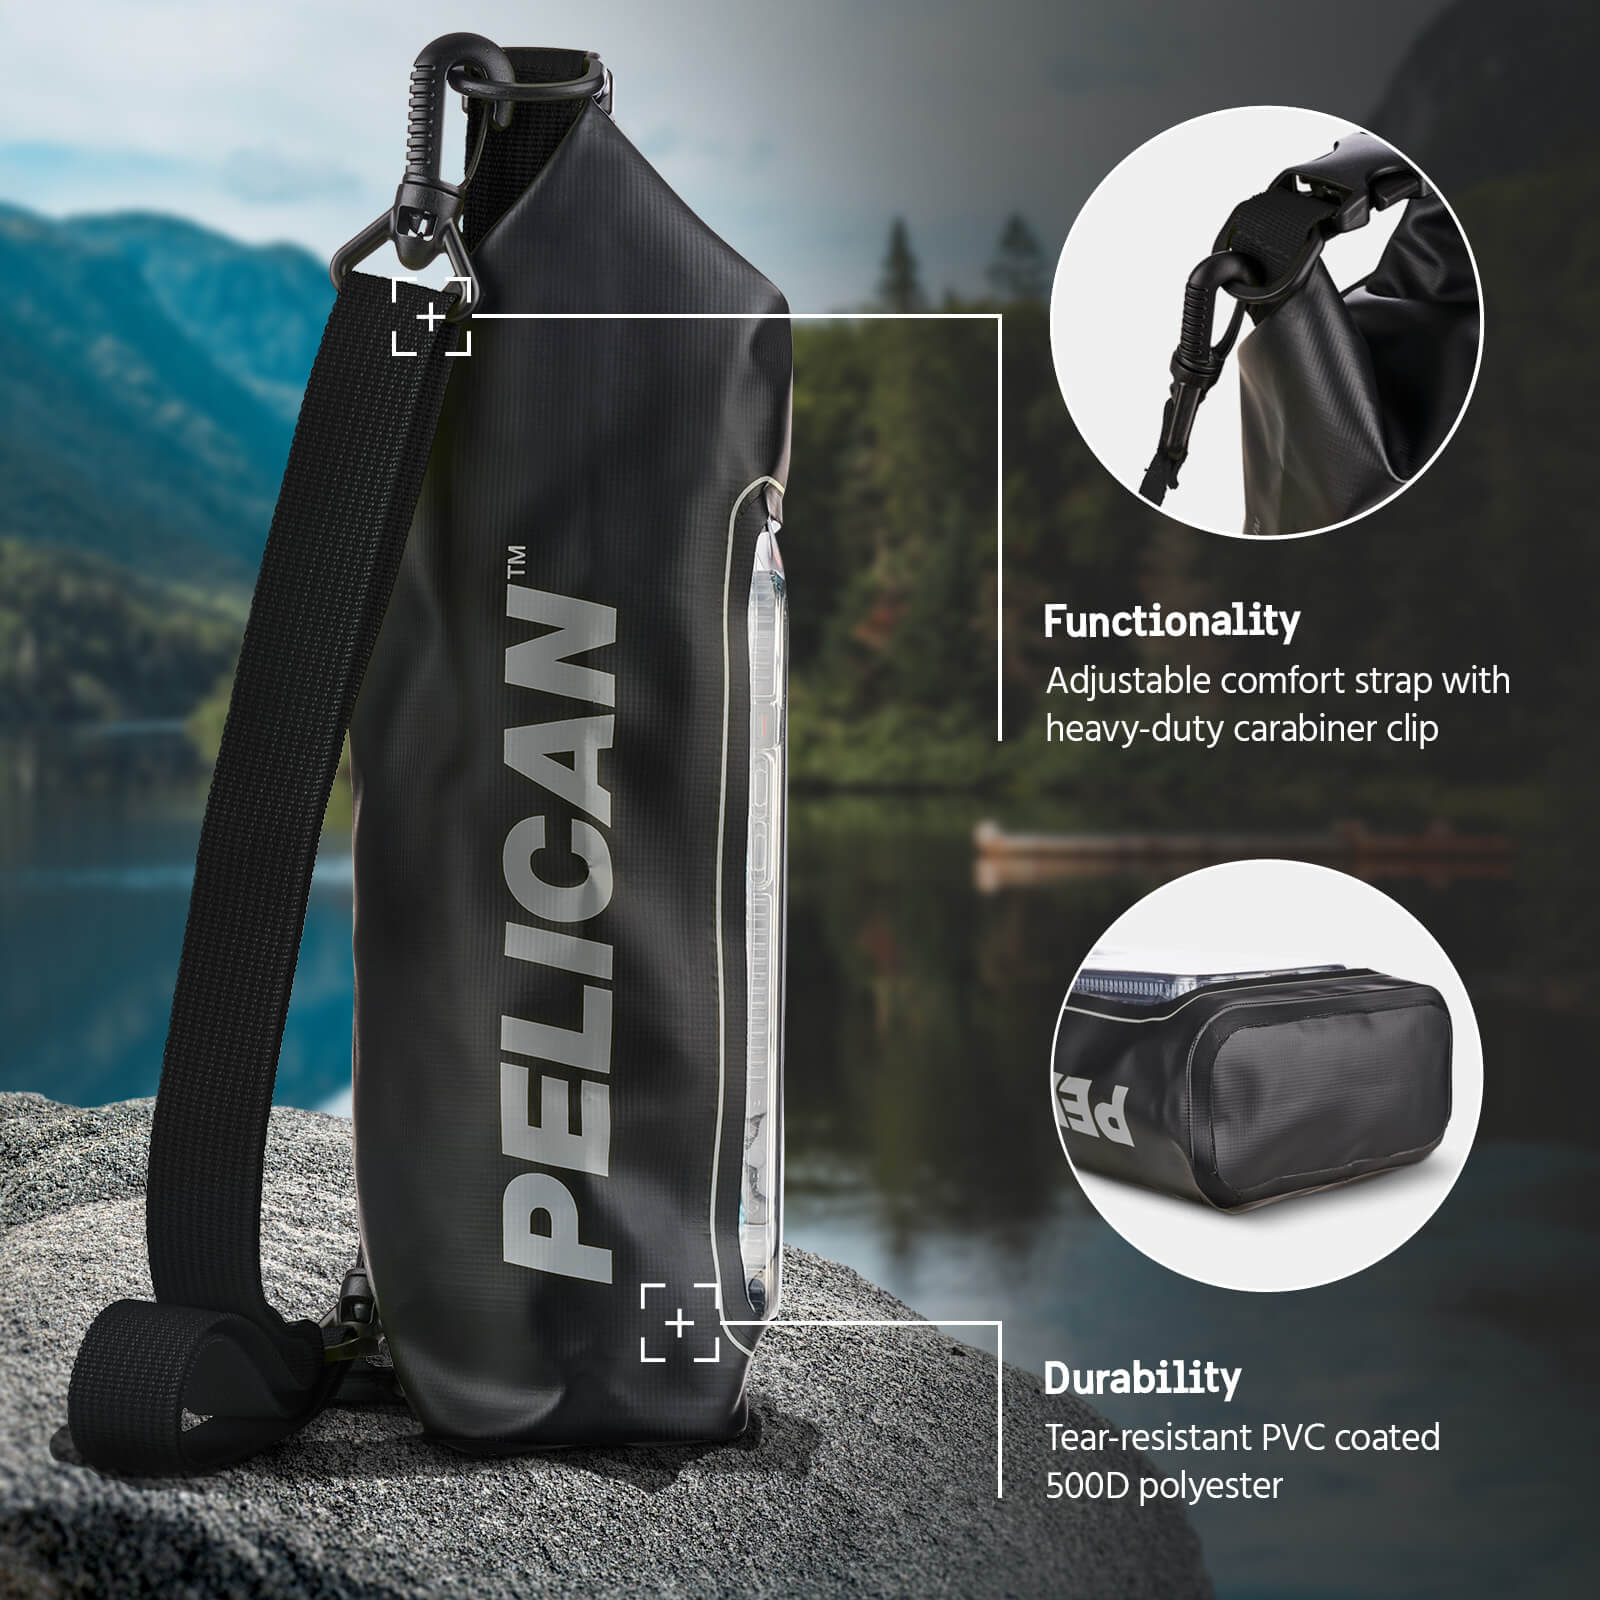 Pelican Marine Waterproof Phone Dry Bag 1P66 Water Resistant. Full Protection against dust, dirt, and other environmental elements. color::Stealth Black